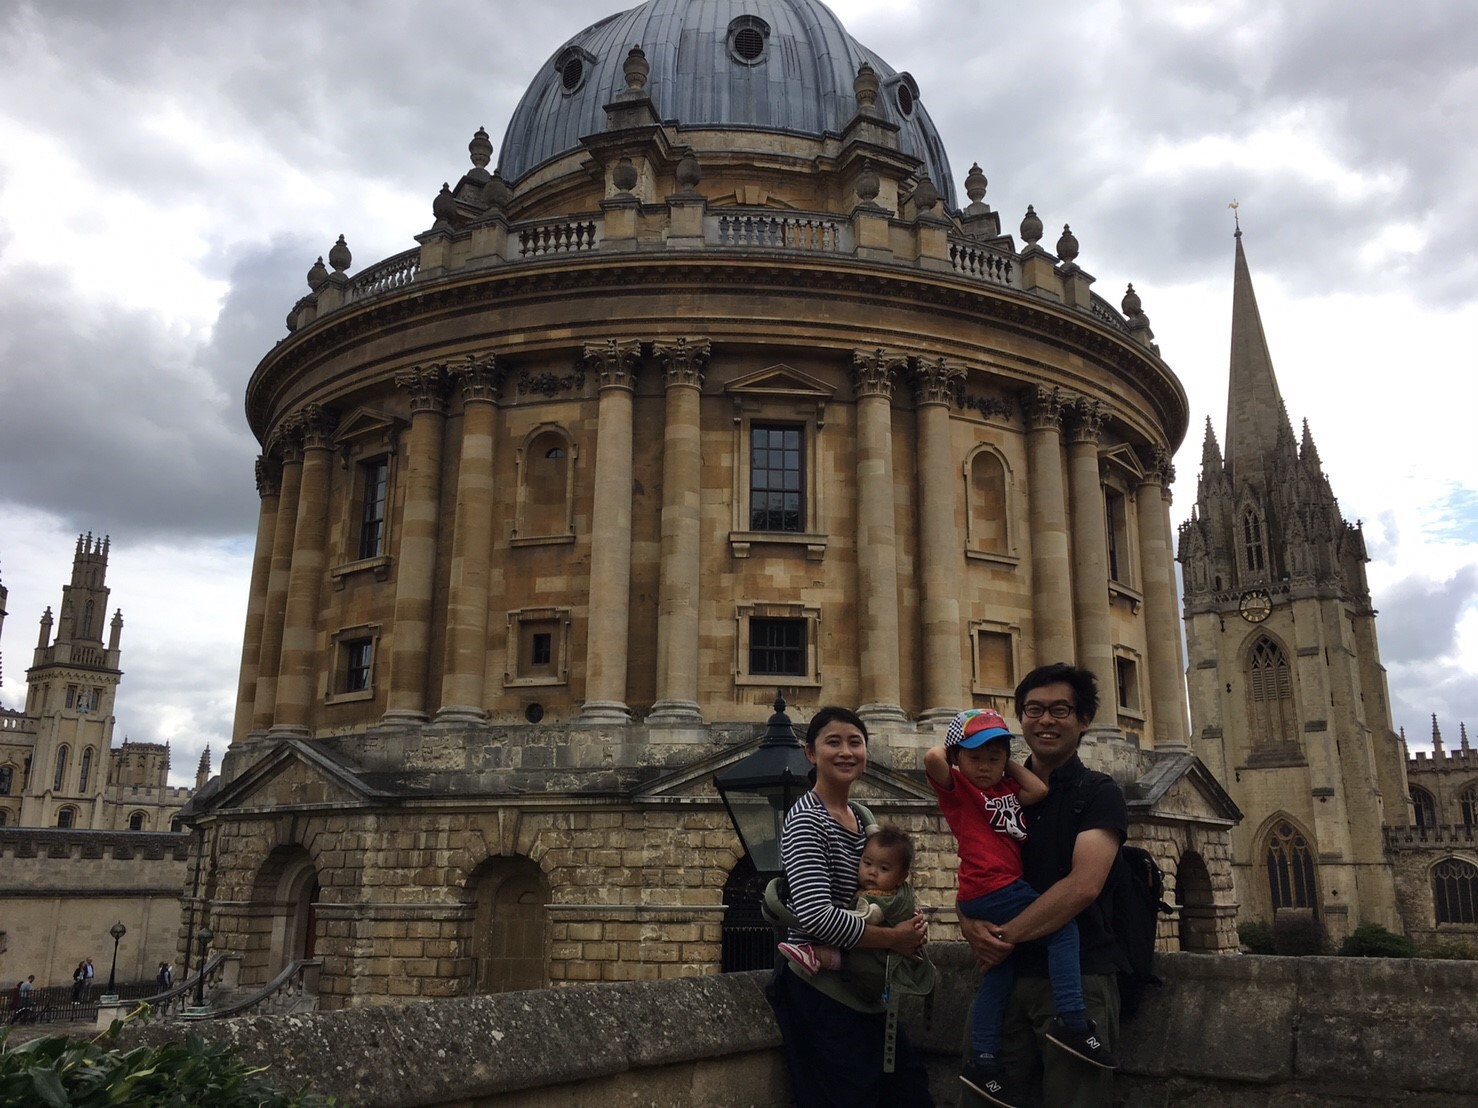 A holiday -In front of Radcliffe Camera